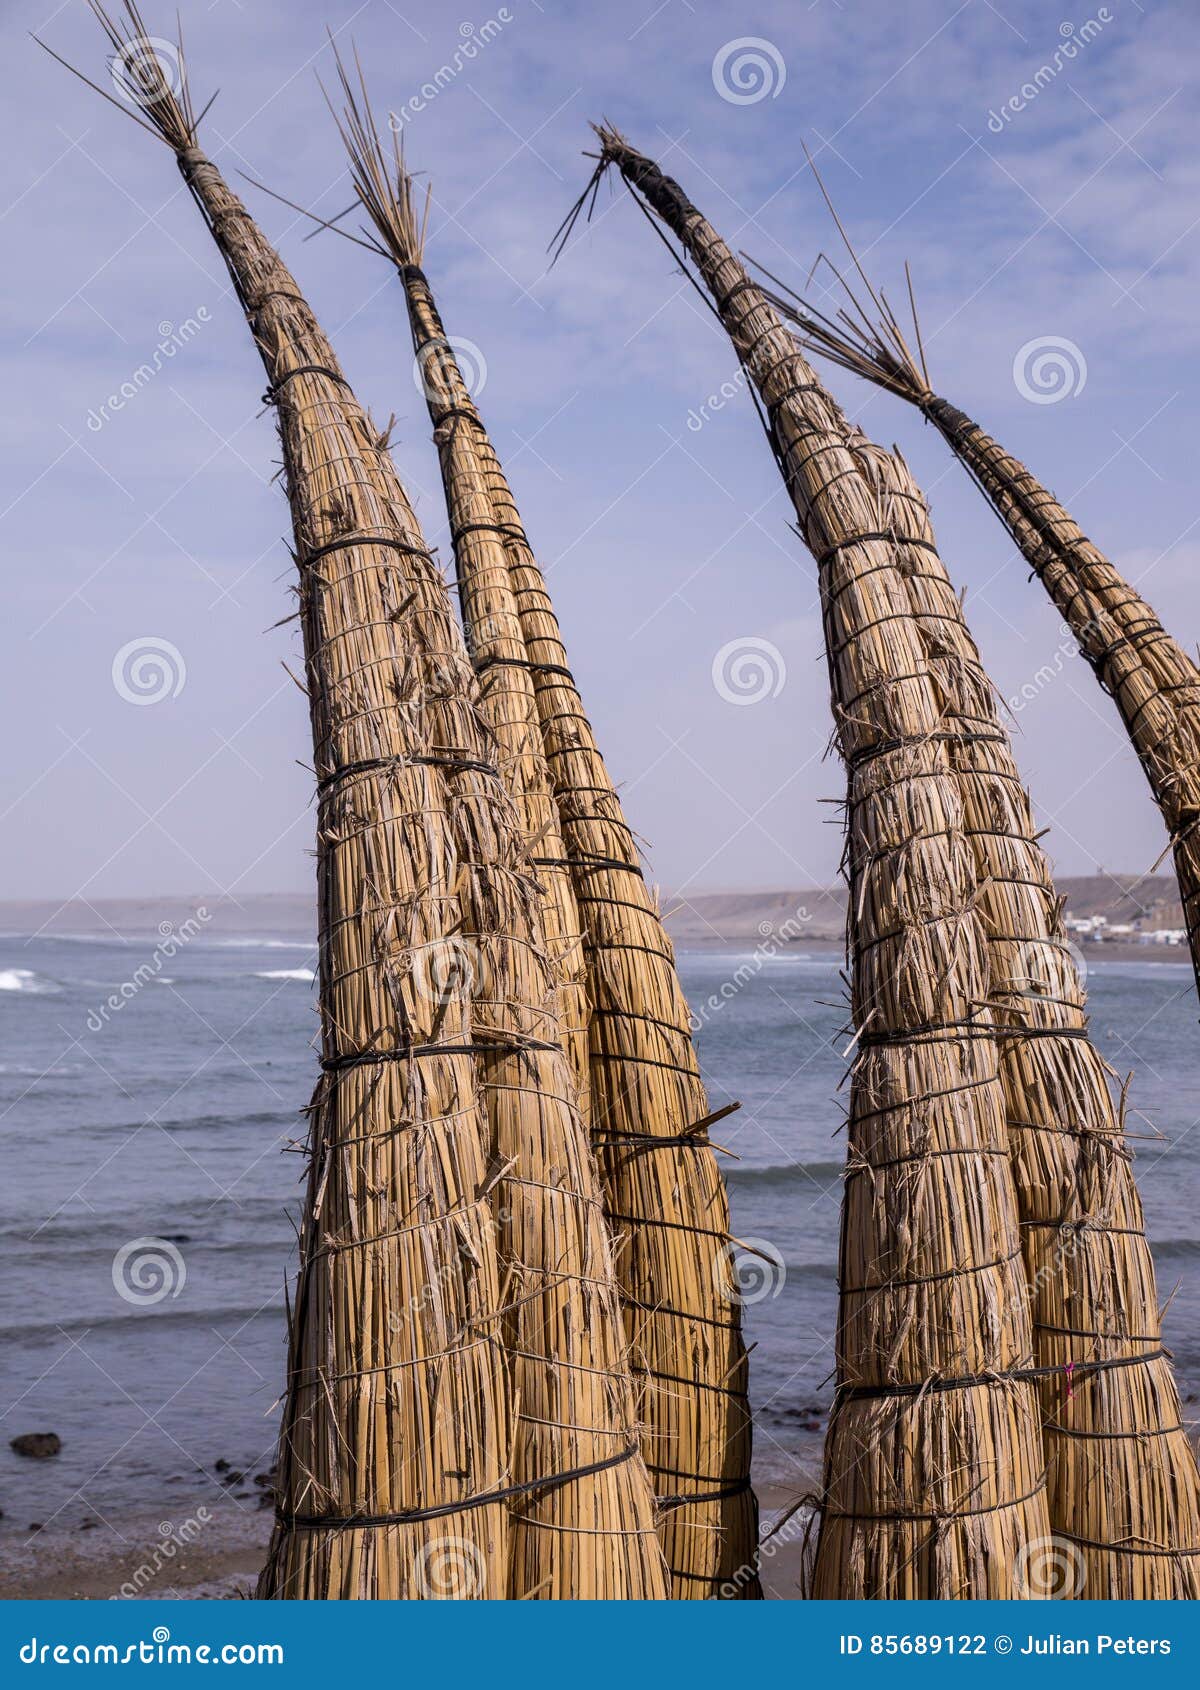 reed canoes on huanchaco beach, peru